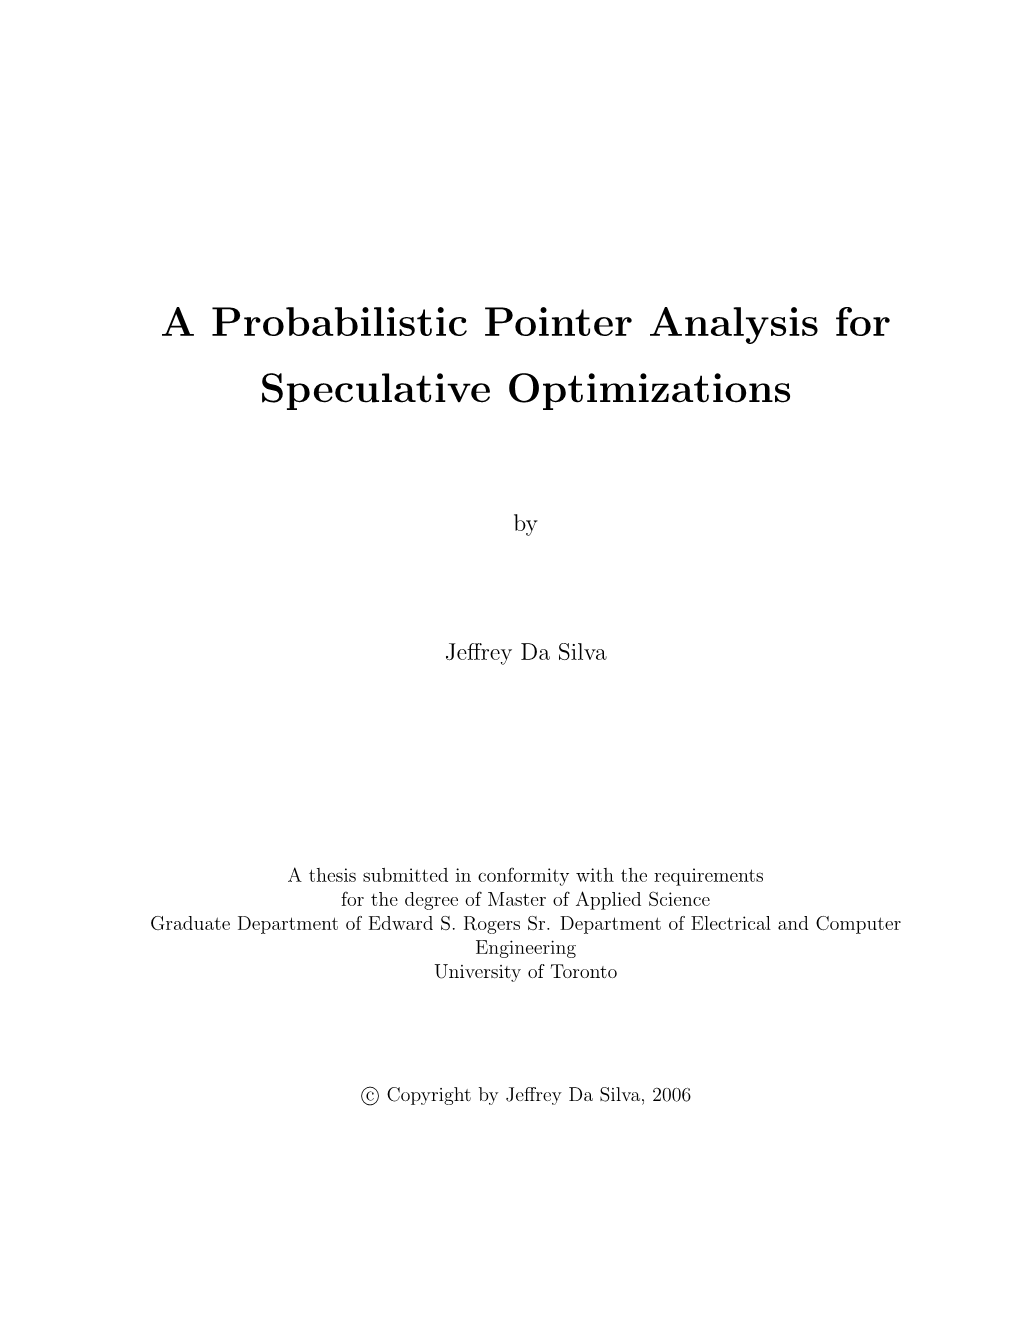 A Probabilistic Pointer Analysis for Speculative Optimizations